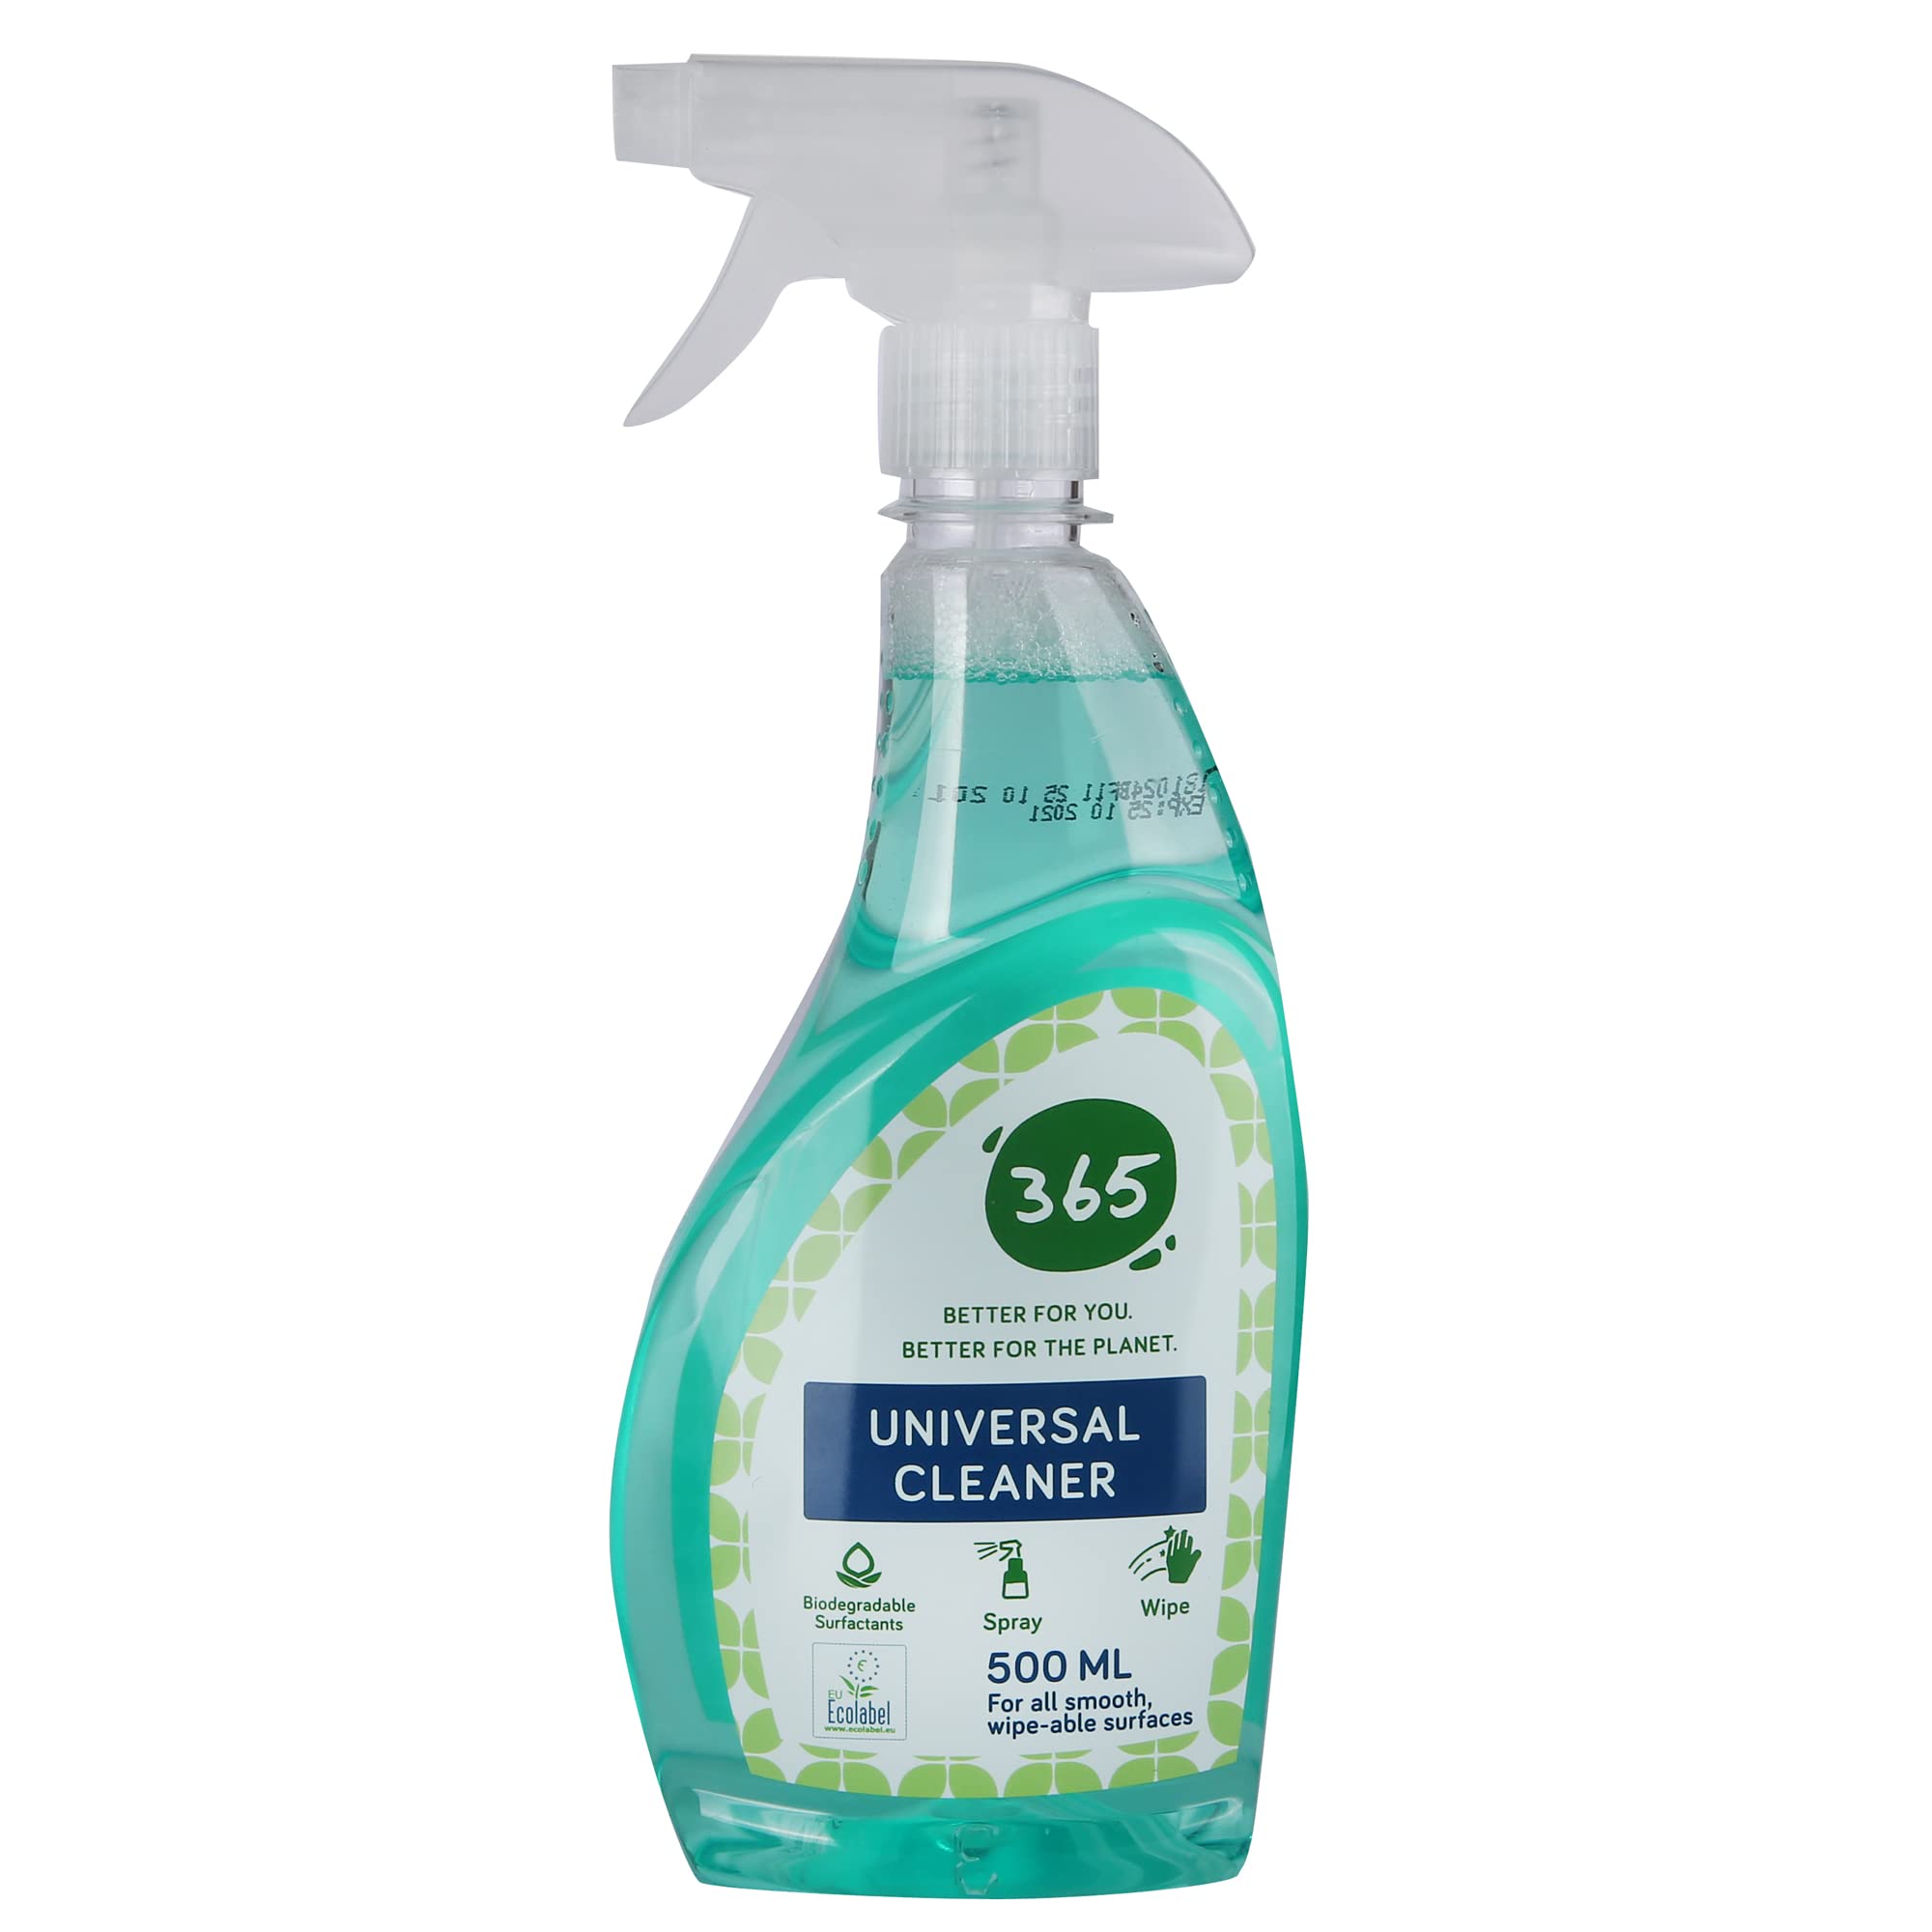 ABSORBIA 365 Universal All Purpose Cleaner (Spray) – 500ml | Certified with ECOLABEL, Biodegradable, Non-Toxic cleaner for all type of Hard Surfaces…